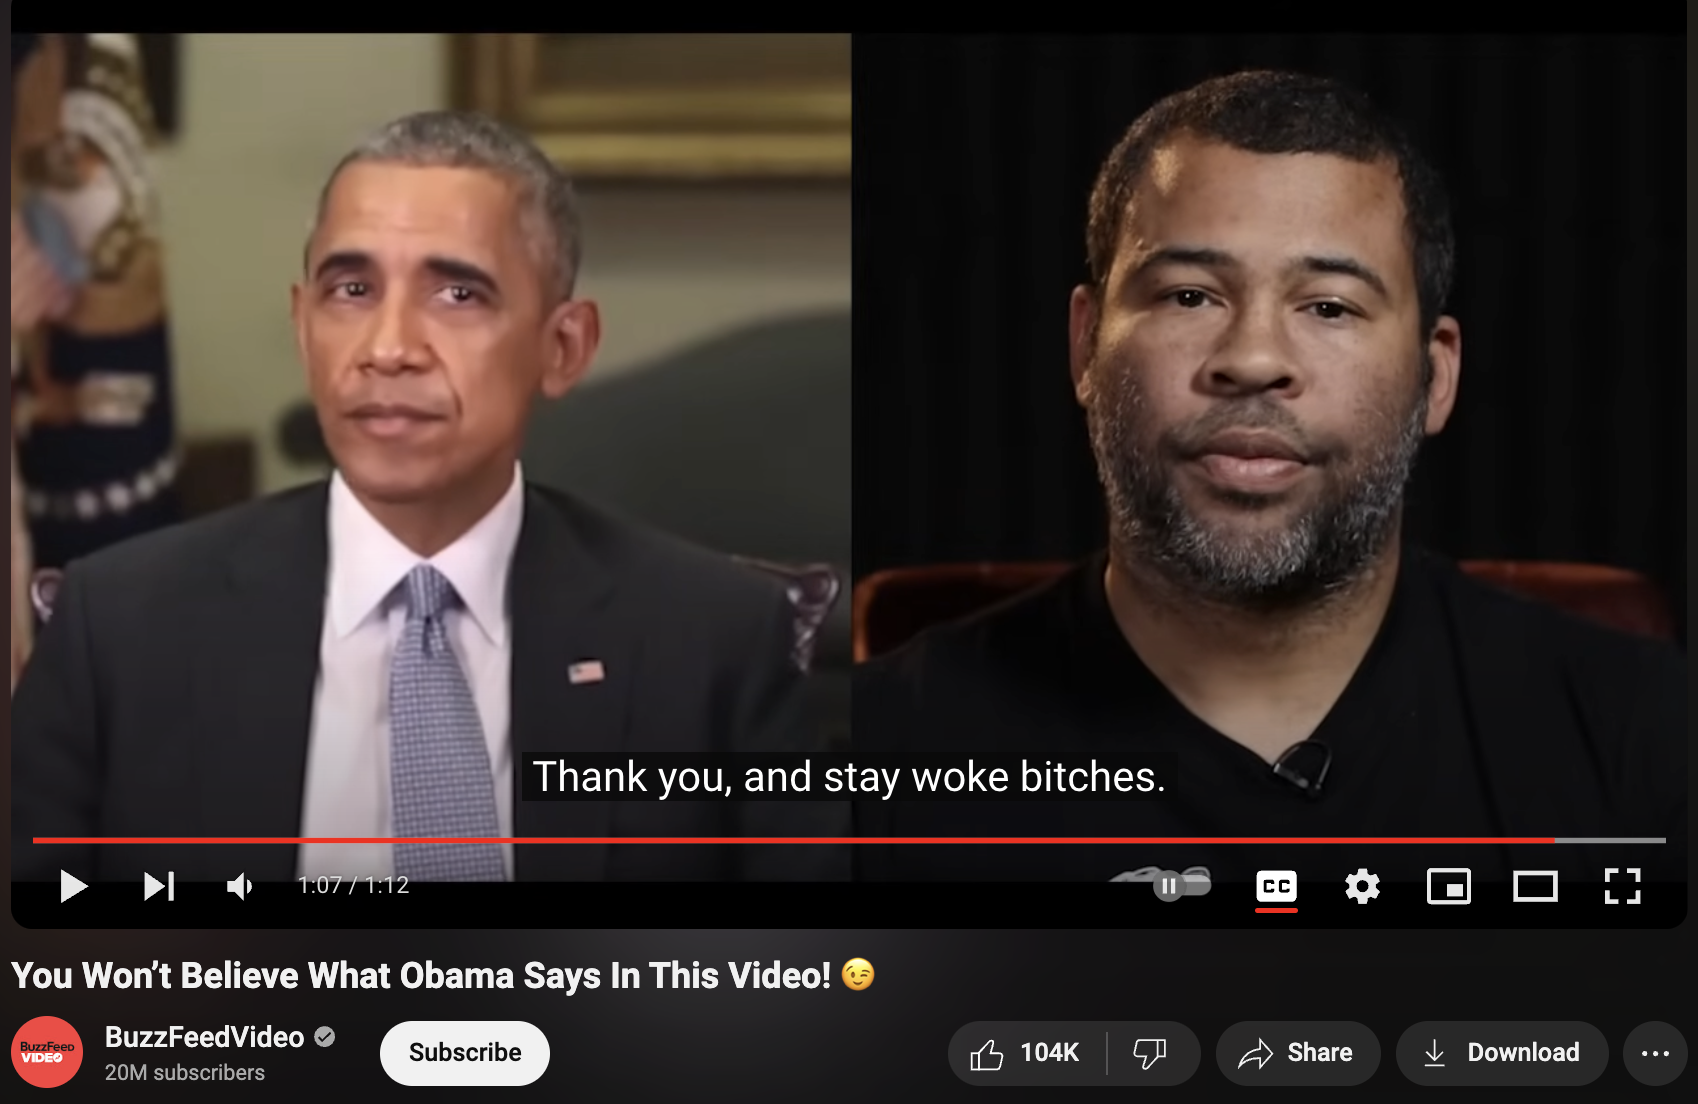 Split screen video with Barack Obama on the left and Jordan Peele on the right, and a caption below Obama